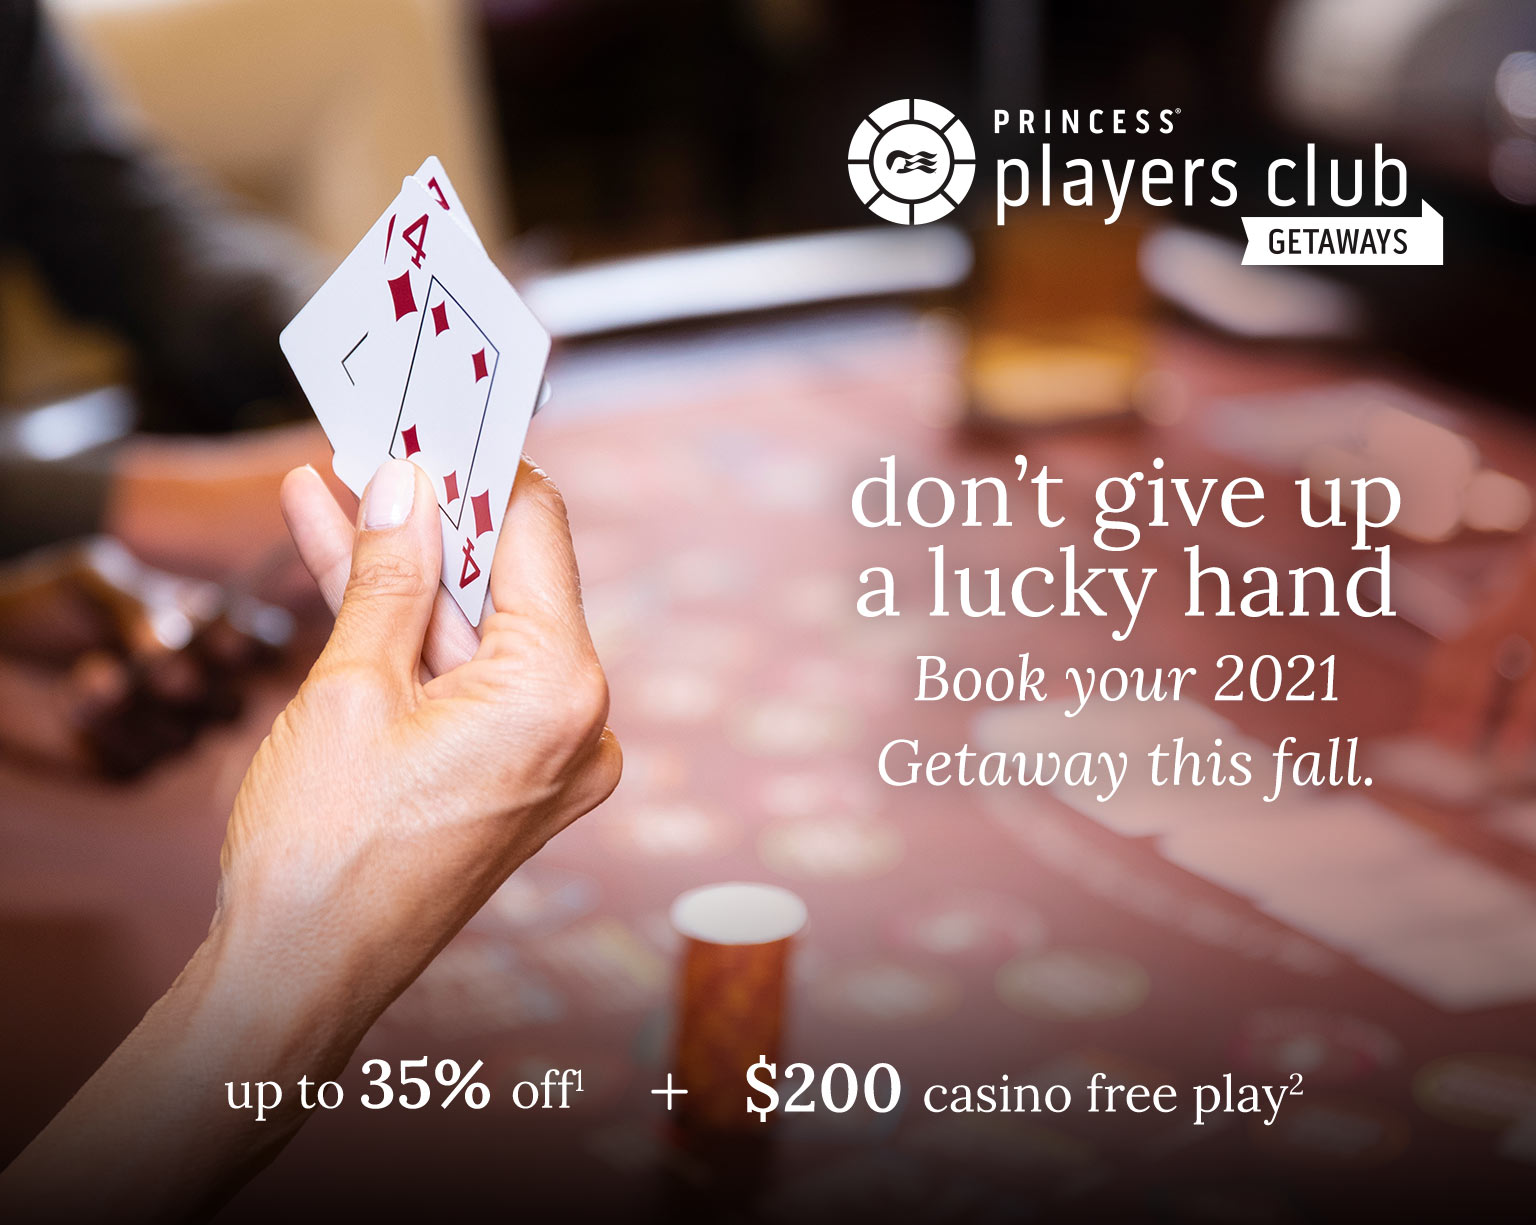 A man and a woman cheer at the slot machines - Princess Players Club Getaways - Don't give up a lucky hand, book your 2021 getaway! - up to 35% off + $200 casino free play